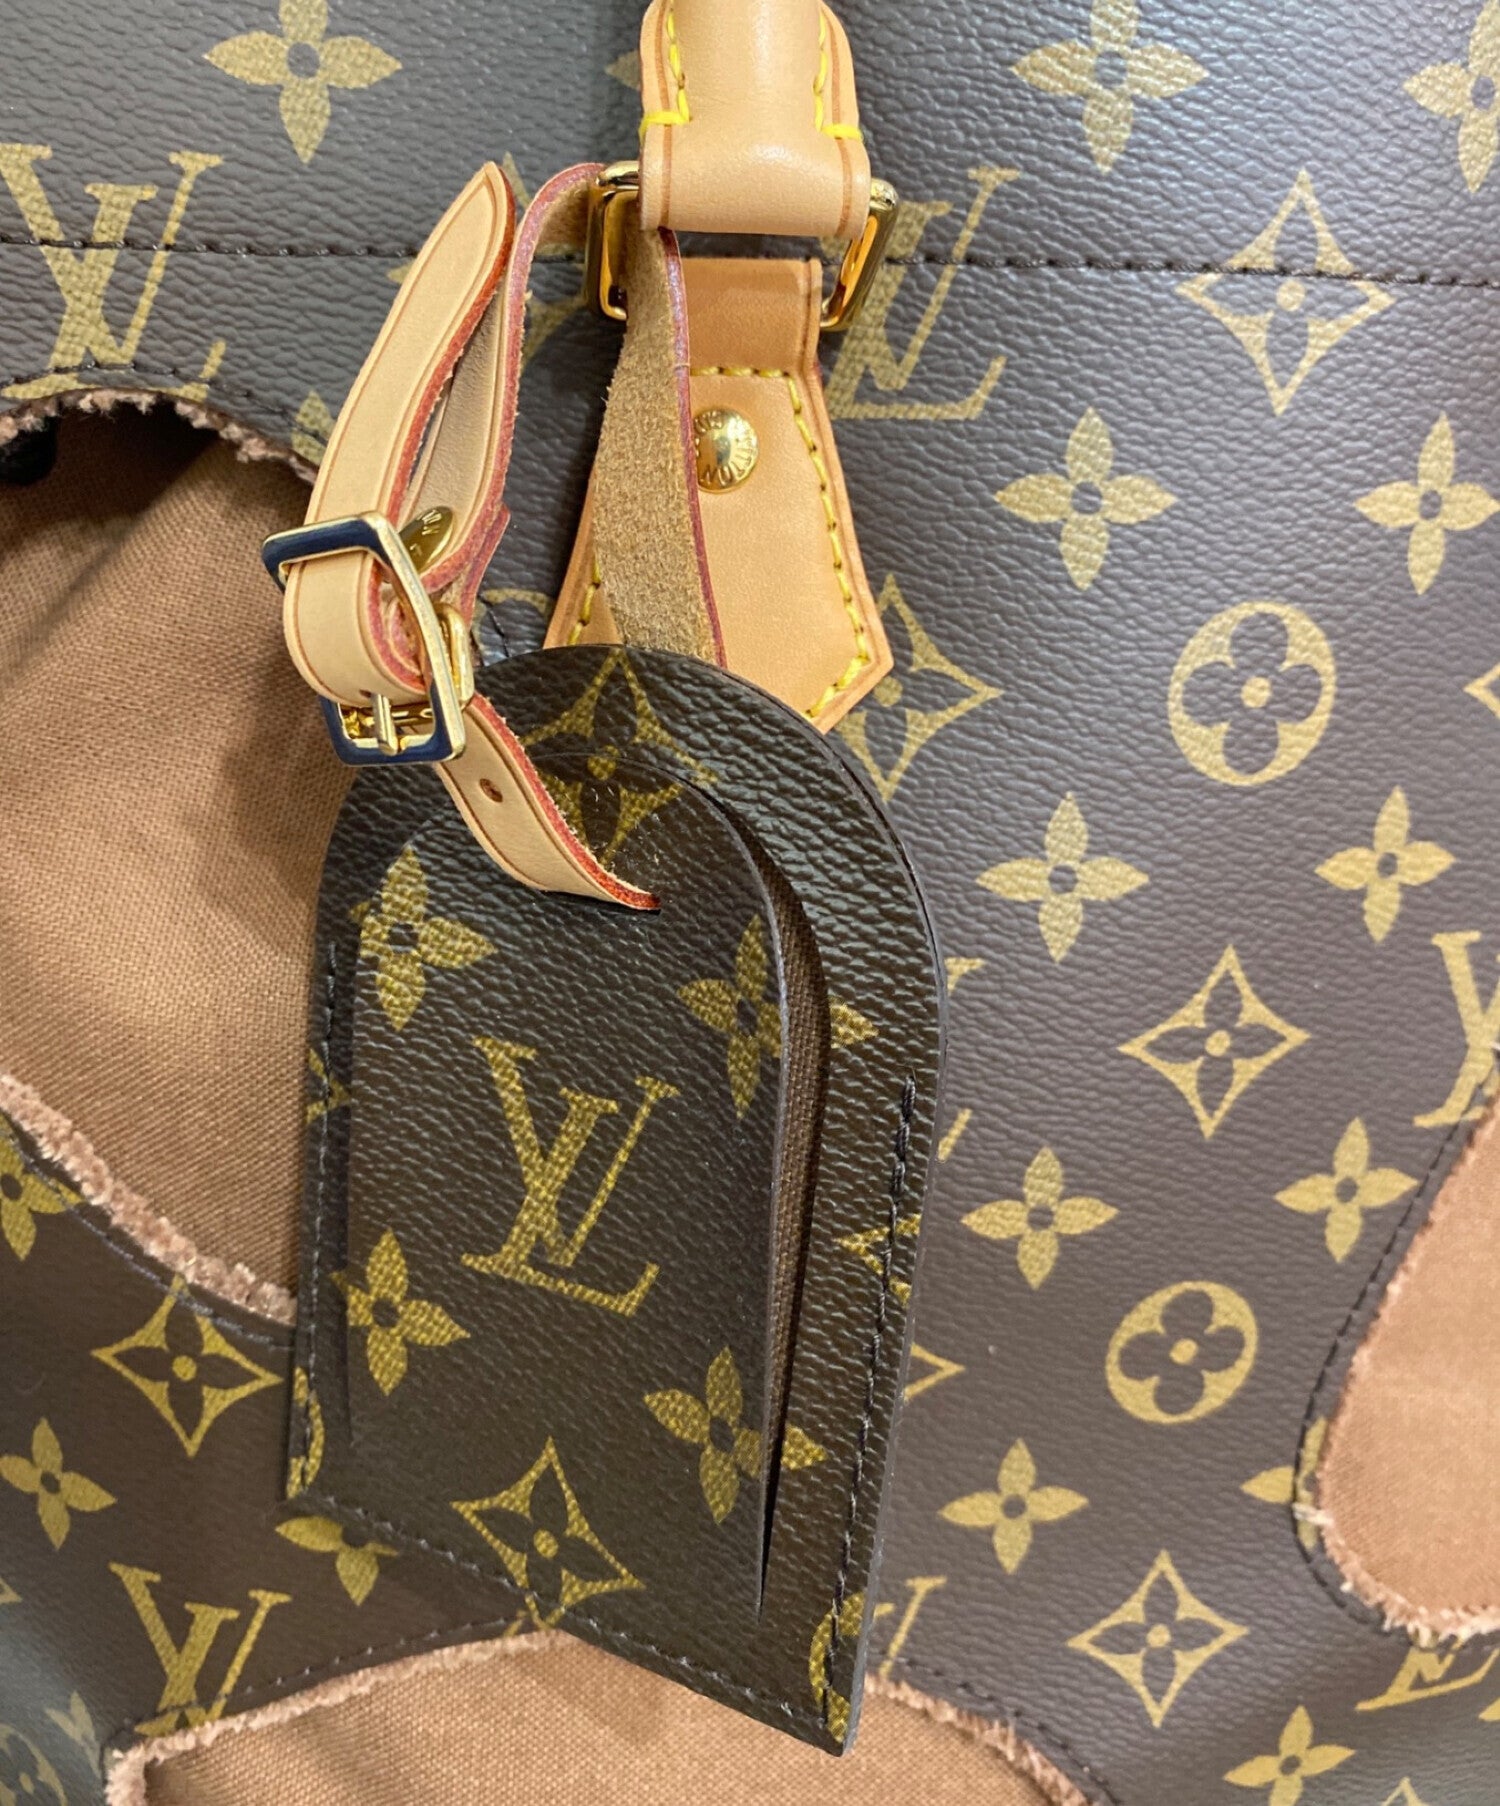 LOUIS VUITTON Bag With Hole Tote Bag M40279